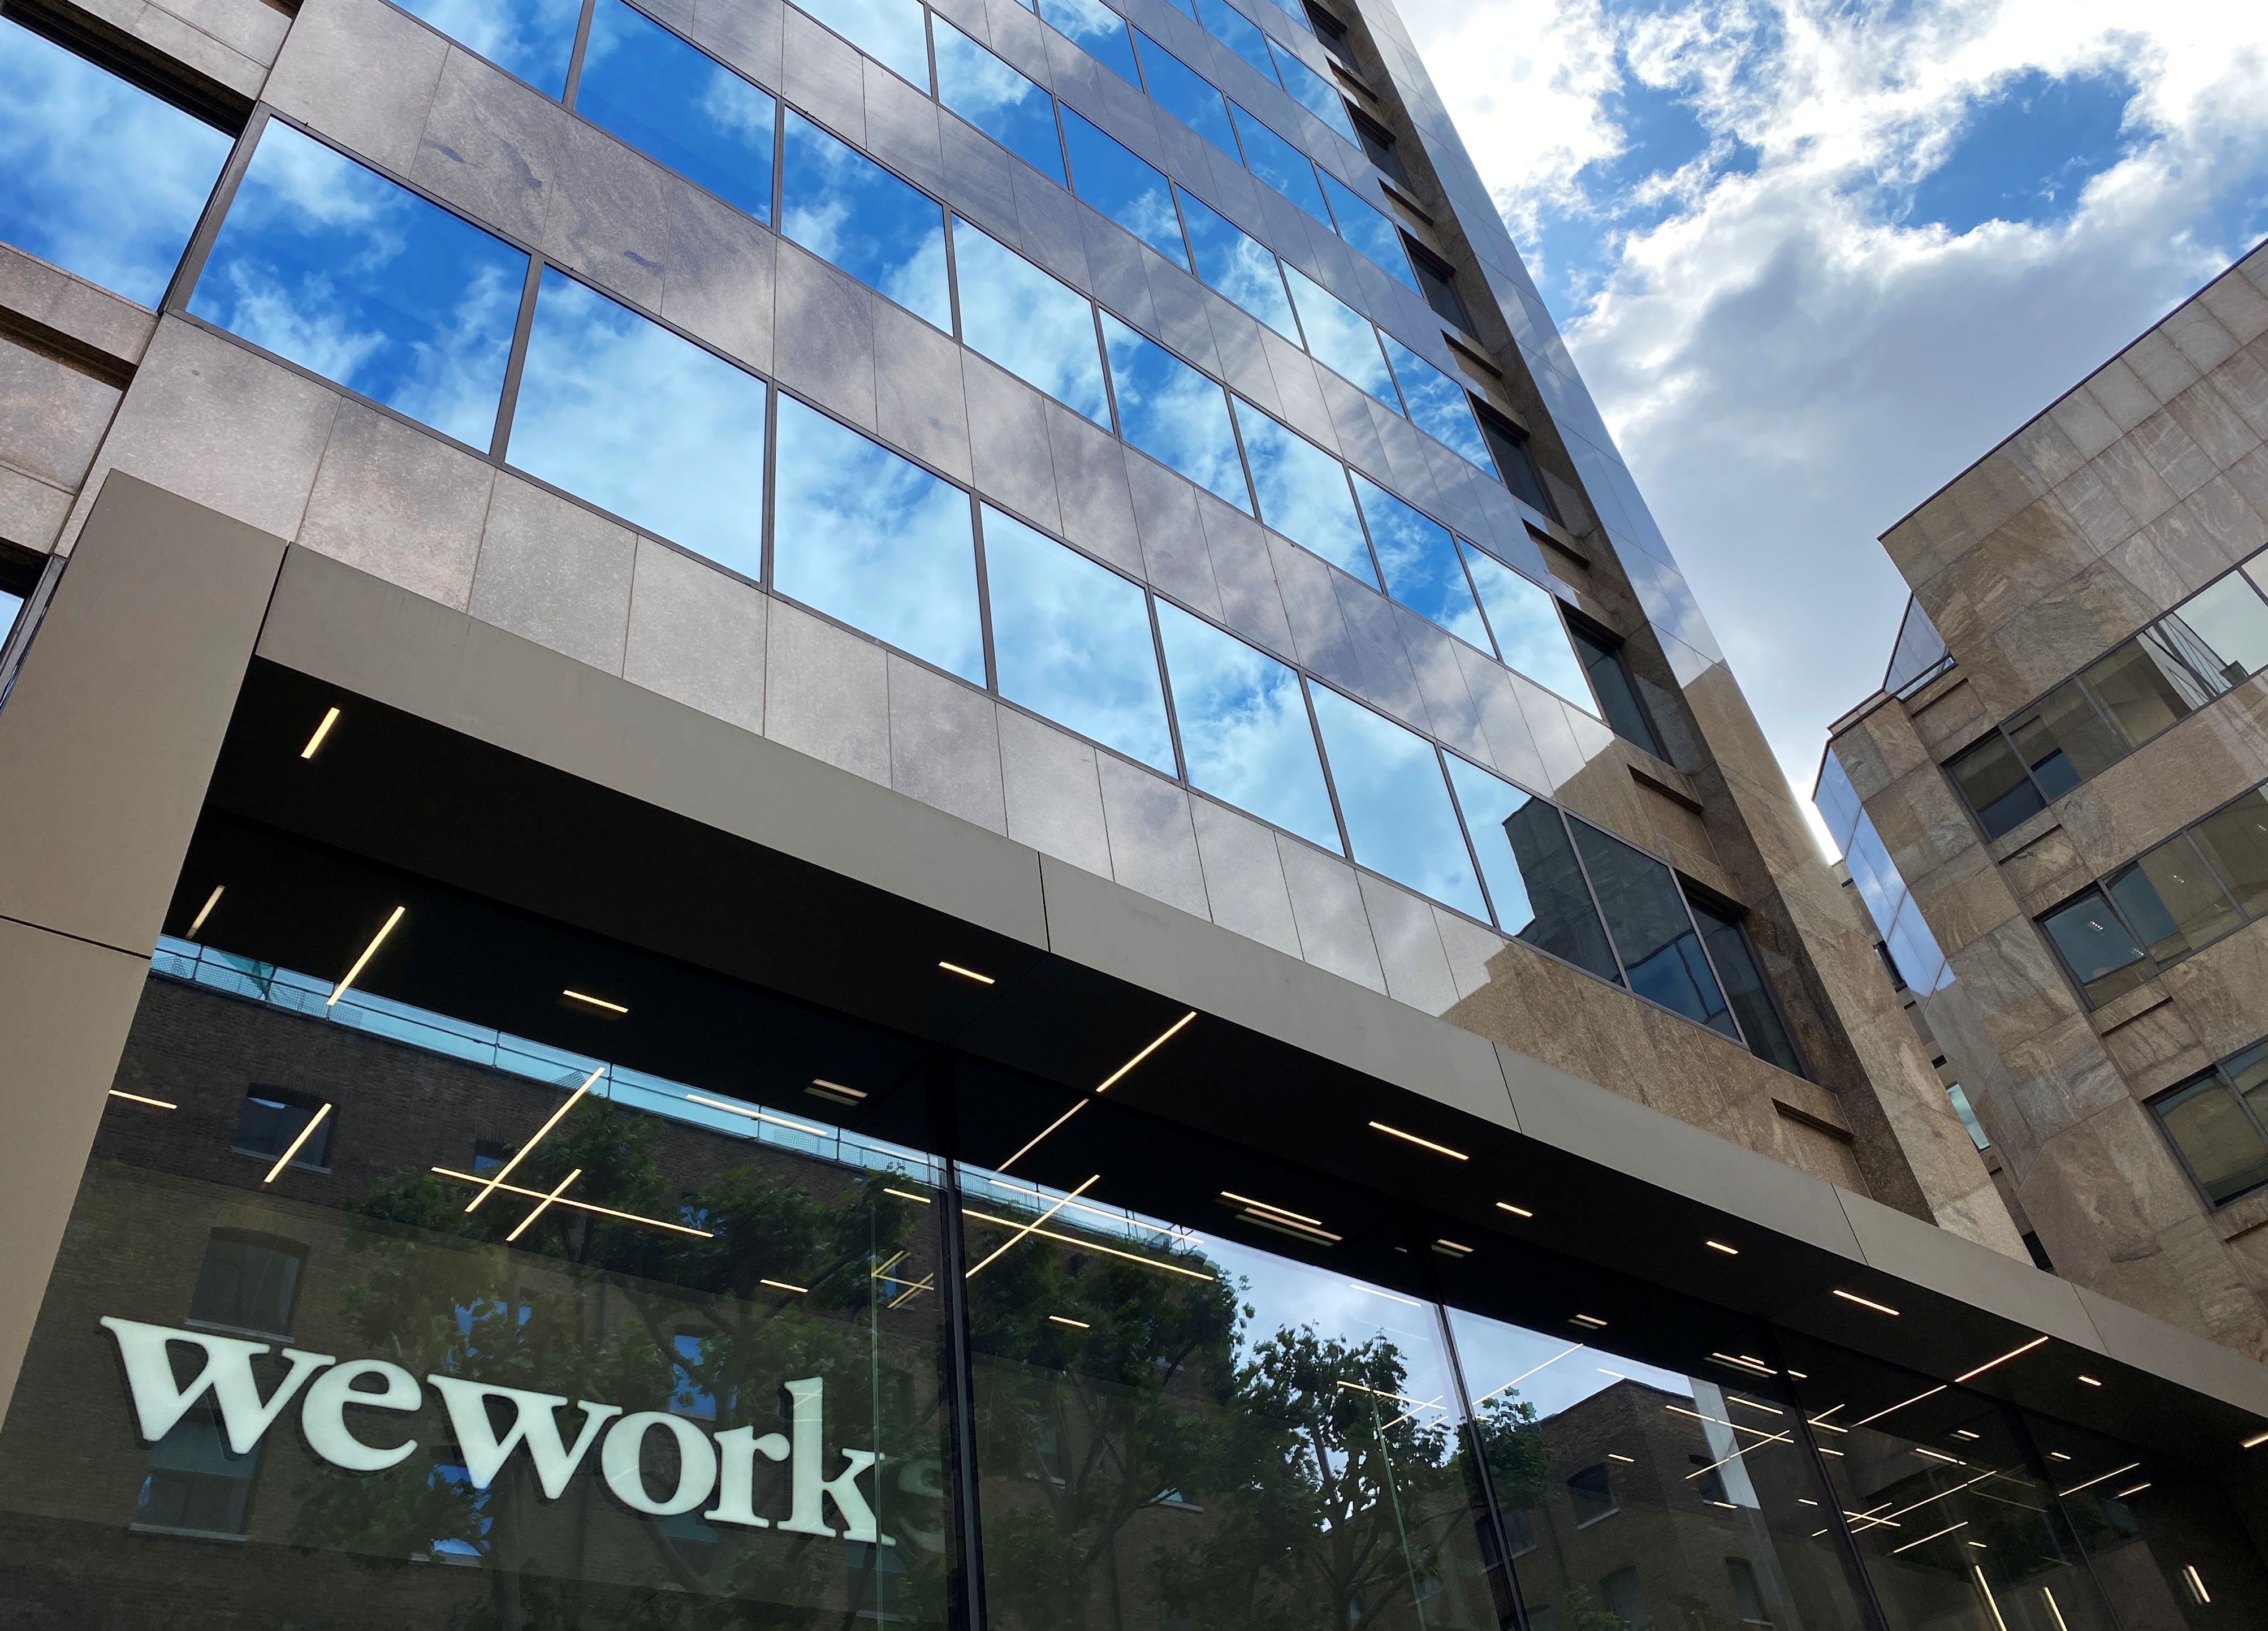 The logo of WeWork is seen in the window of a building in London